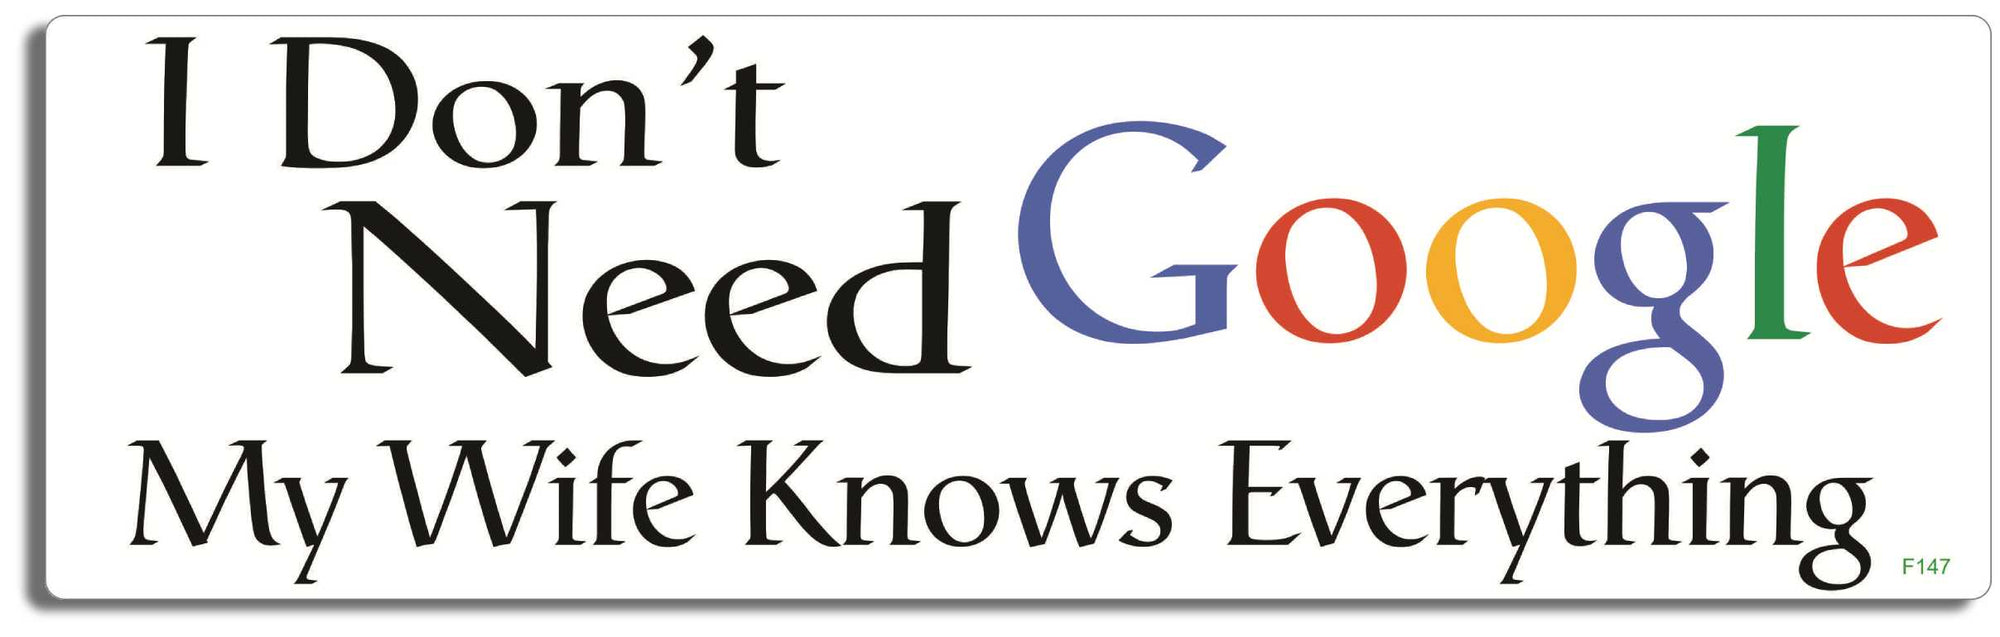 I don't need Google. My wife knows everything - 3" x 10" Bumper Sticker--Car Magnet- -  Decal Bumper Sticker-funny Bumper Sticker Car Magnet I don't need Google. My wife knows-  Decal for carsWife